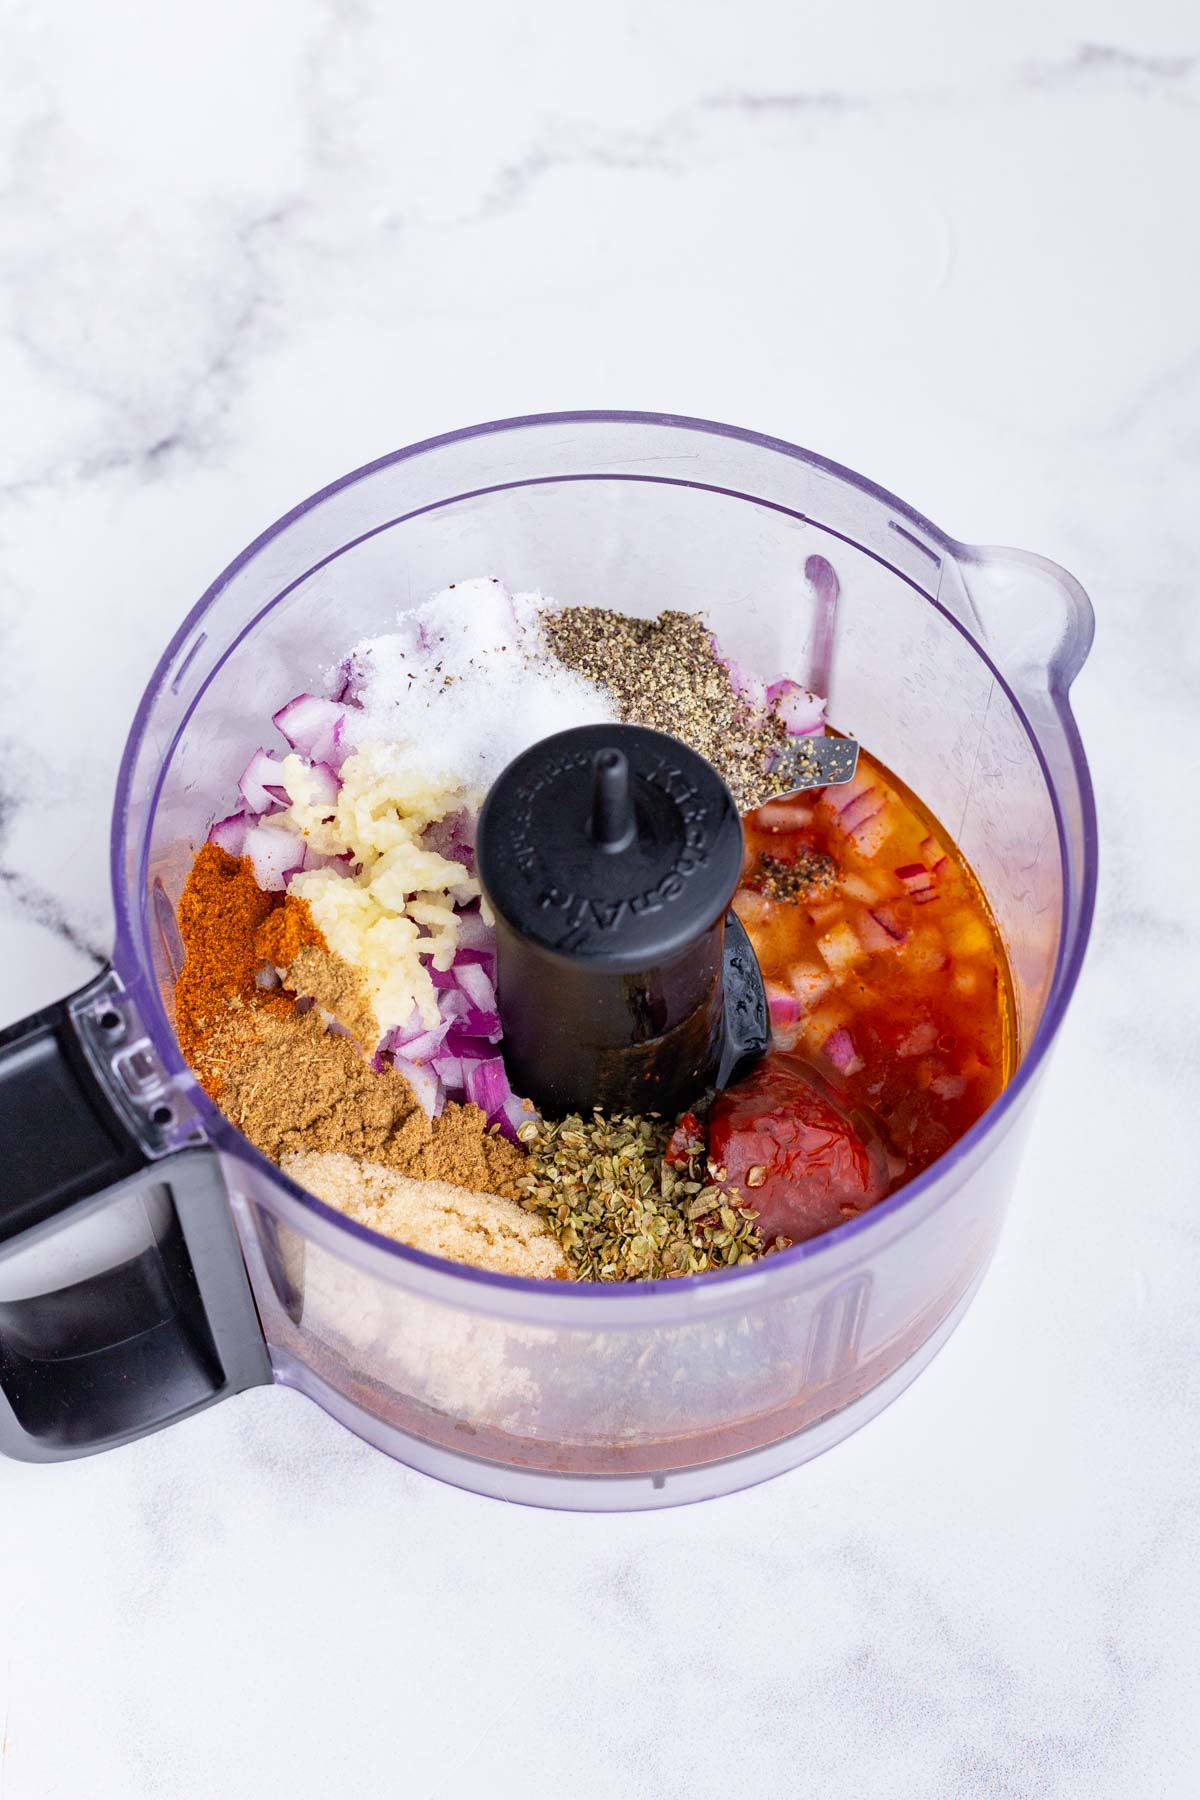 Marinade ingredients are placed in a food processor.